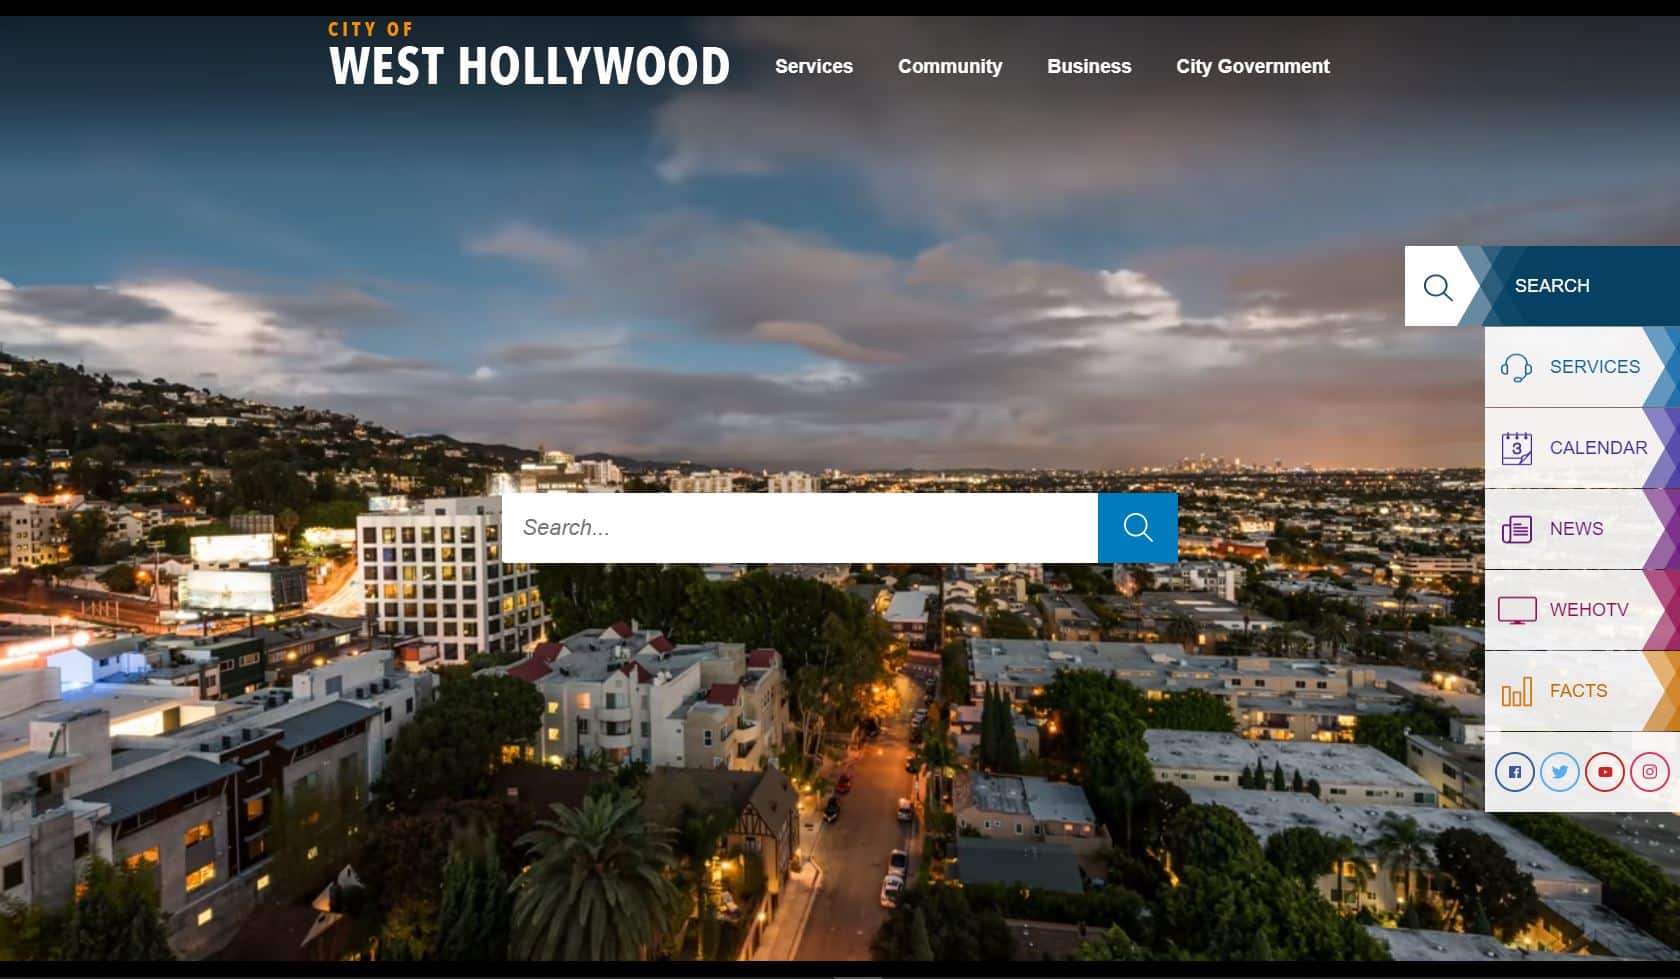 Engaging Videography: The City of West Hollywood Government Website